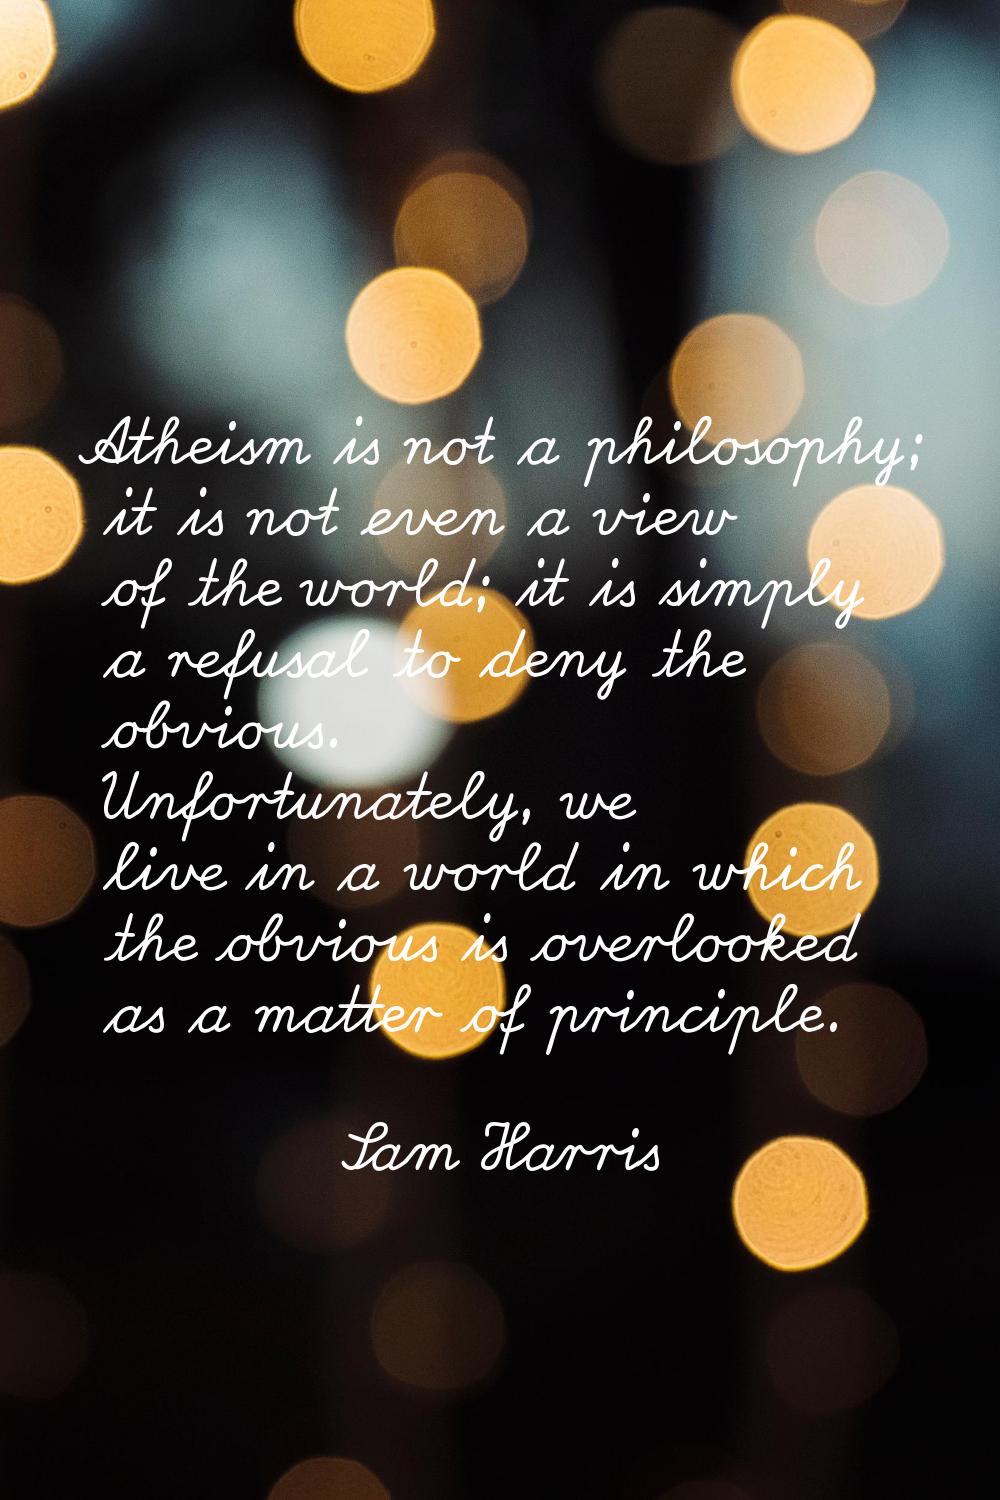 Atheism is not a philosophy; it is not even a view of the world; it is simply a refusal to deny the